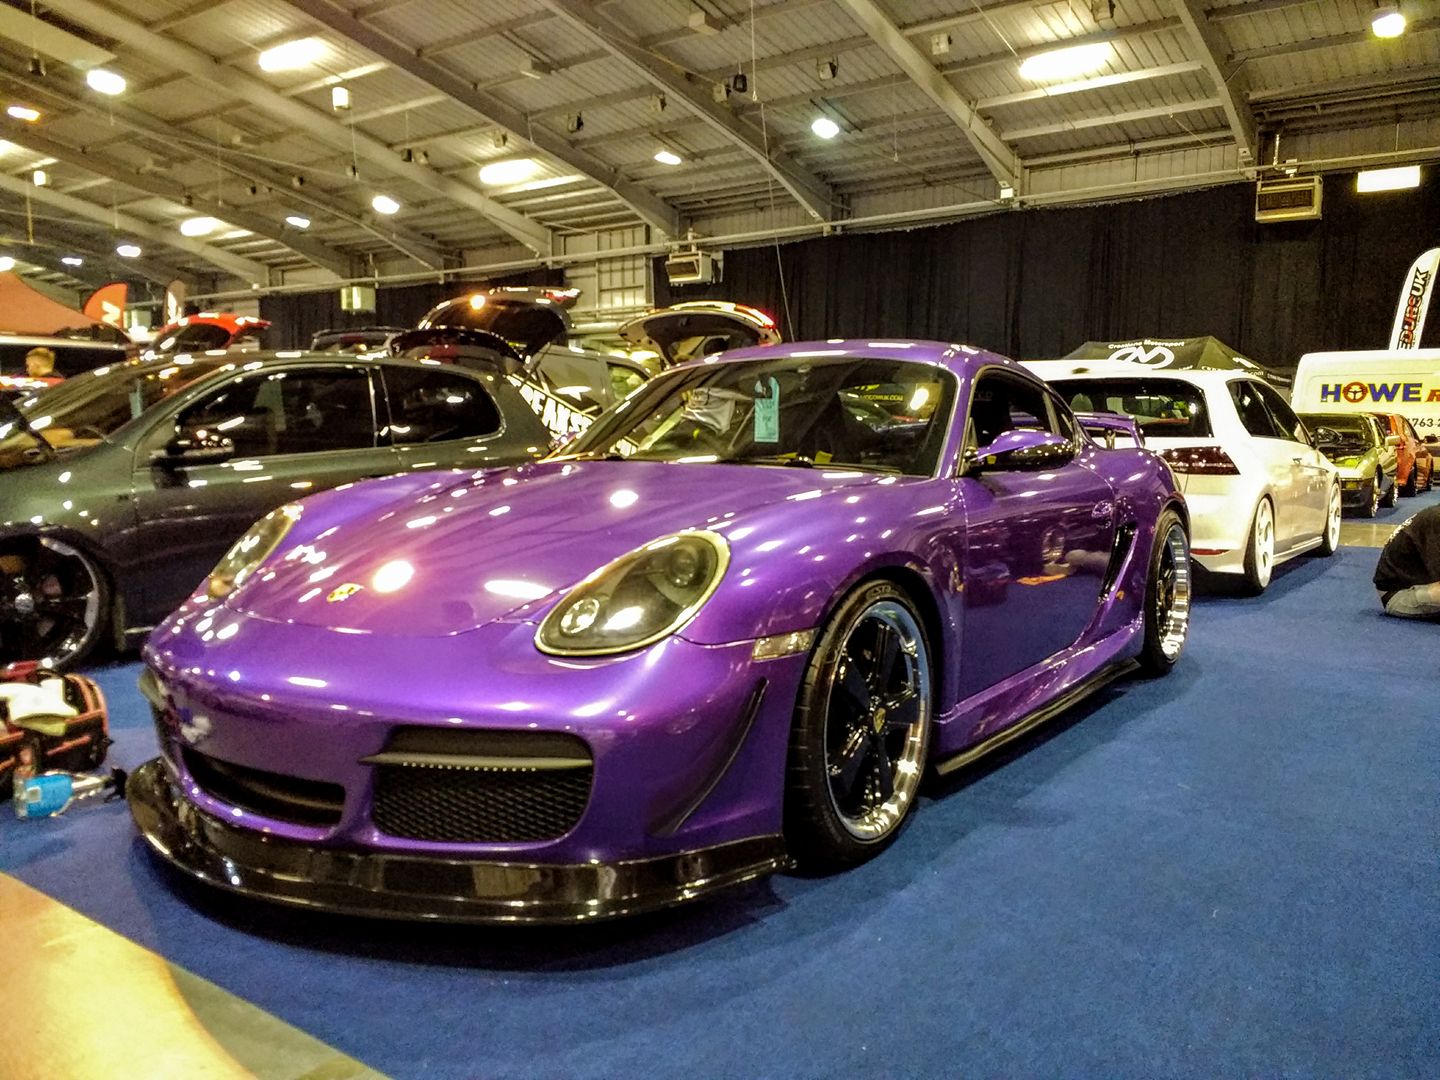 Porsche Cayman 987 (Modifications, Trackdays & a Fun Magnet) - Page 1 - Readers' Cars - PistonHeads